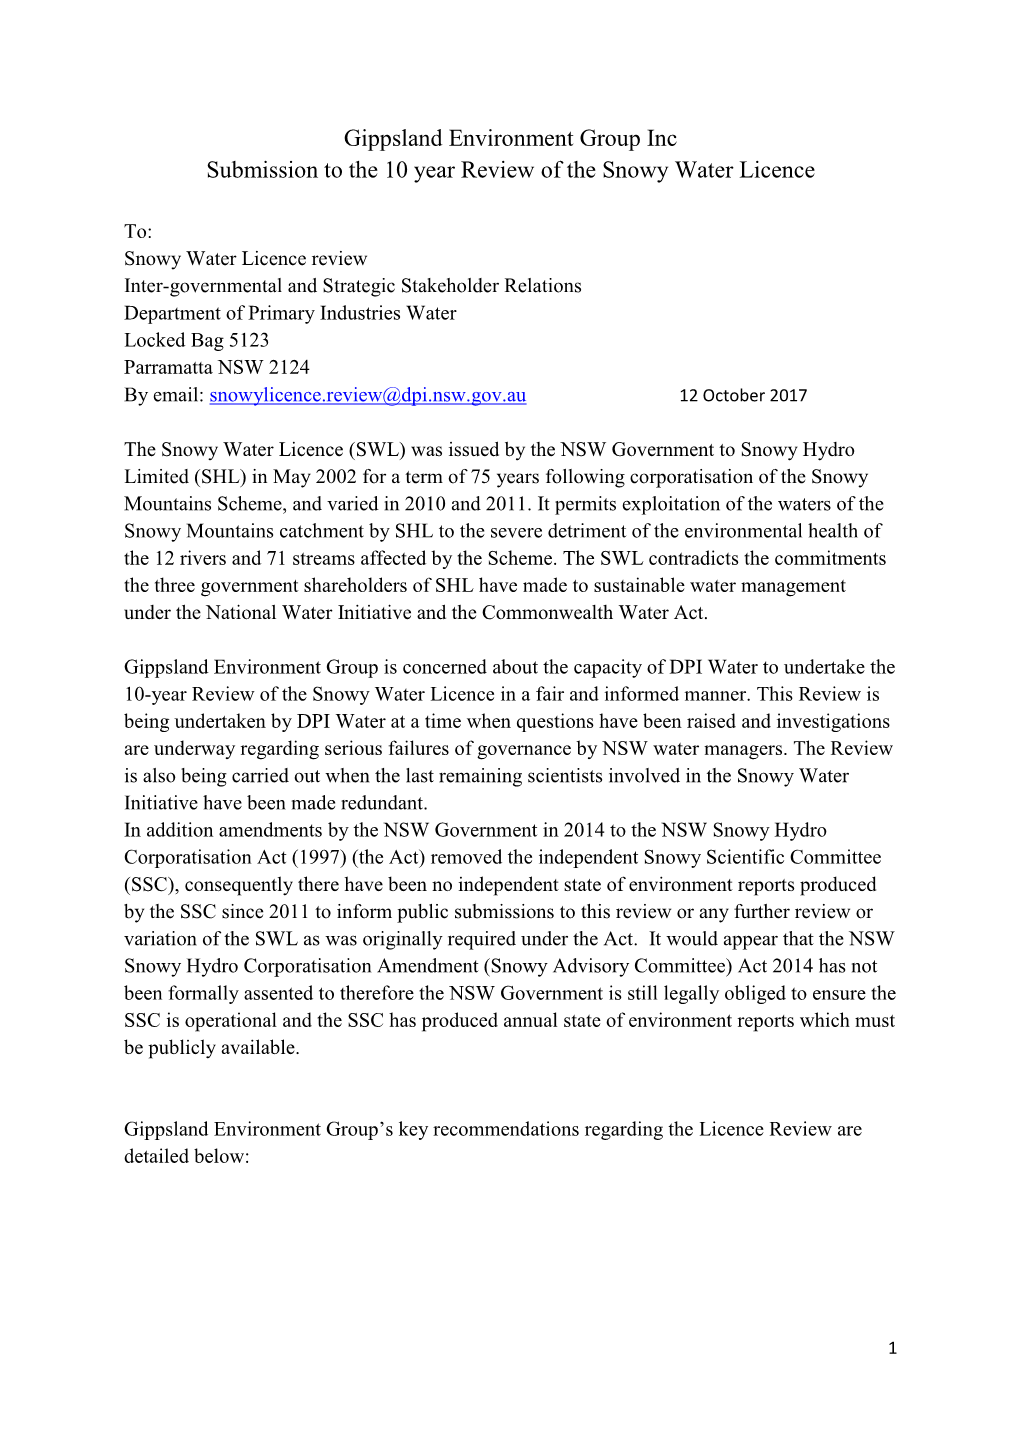 GEG Submission to the 10-Year Review of the Snowy Water Licence